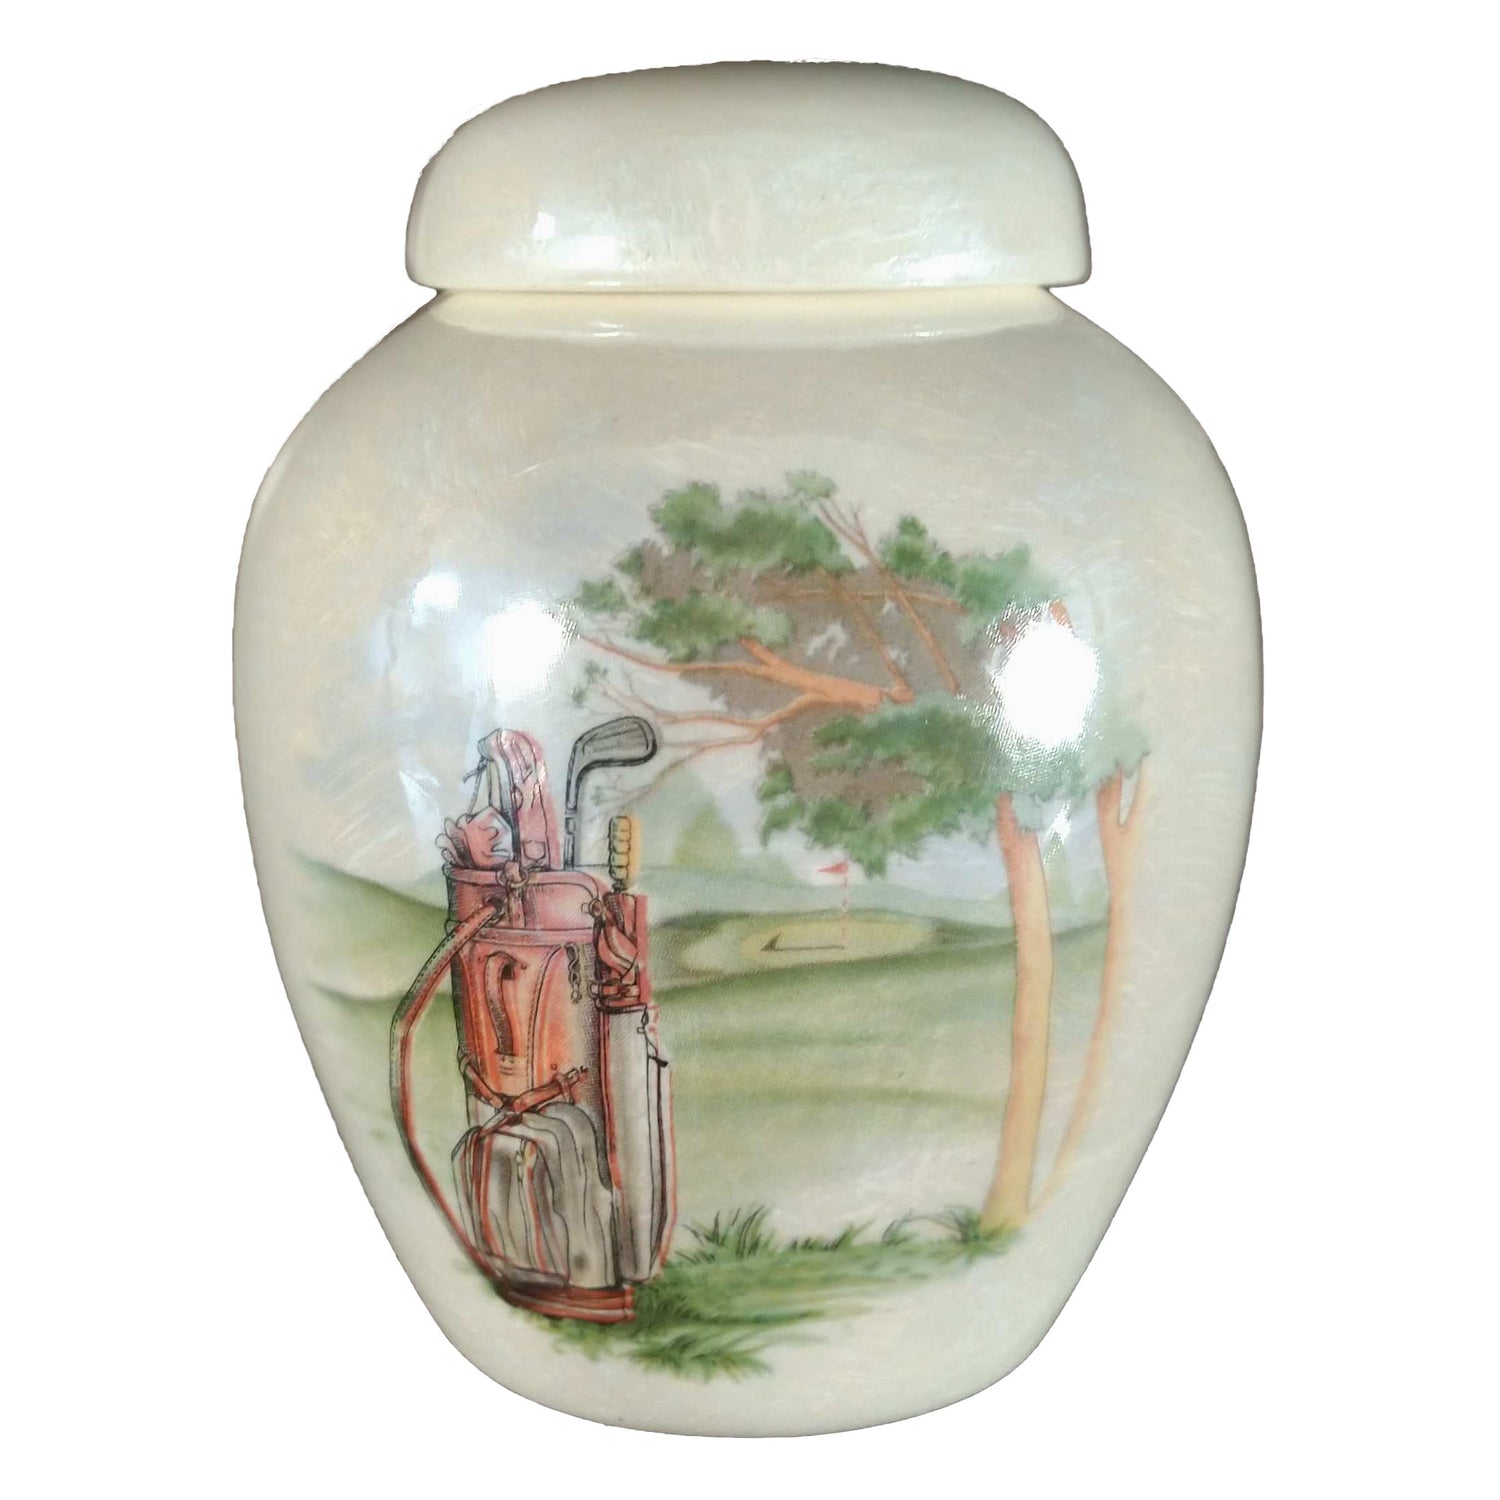 A beautiful small cremation ceramic keepsake urn with a decoration of a golf club bag standing upright on a golf course with a mother-of-pearl finish.